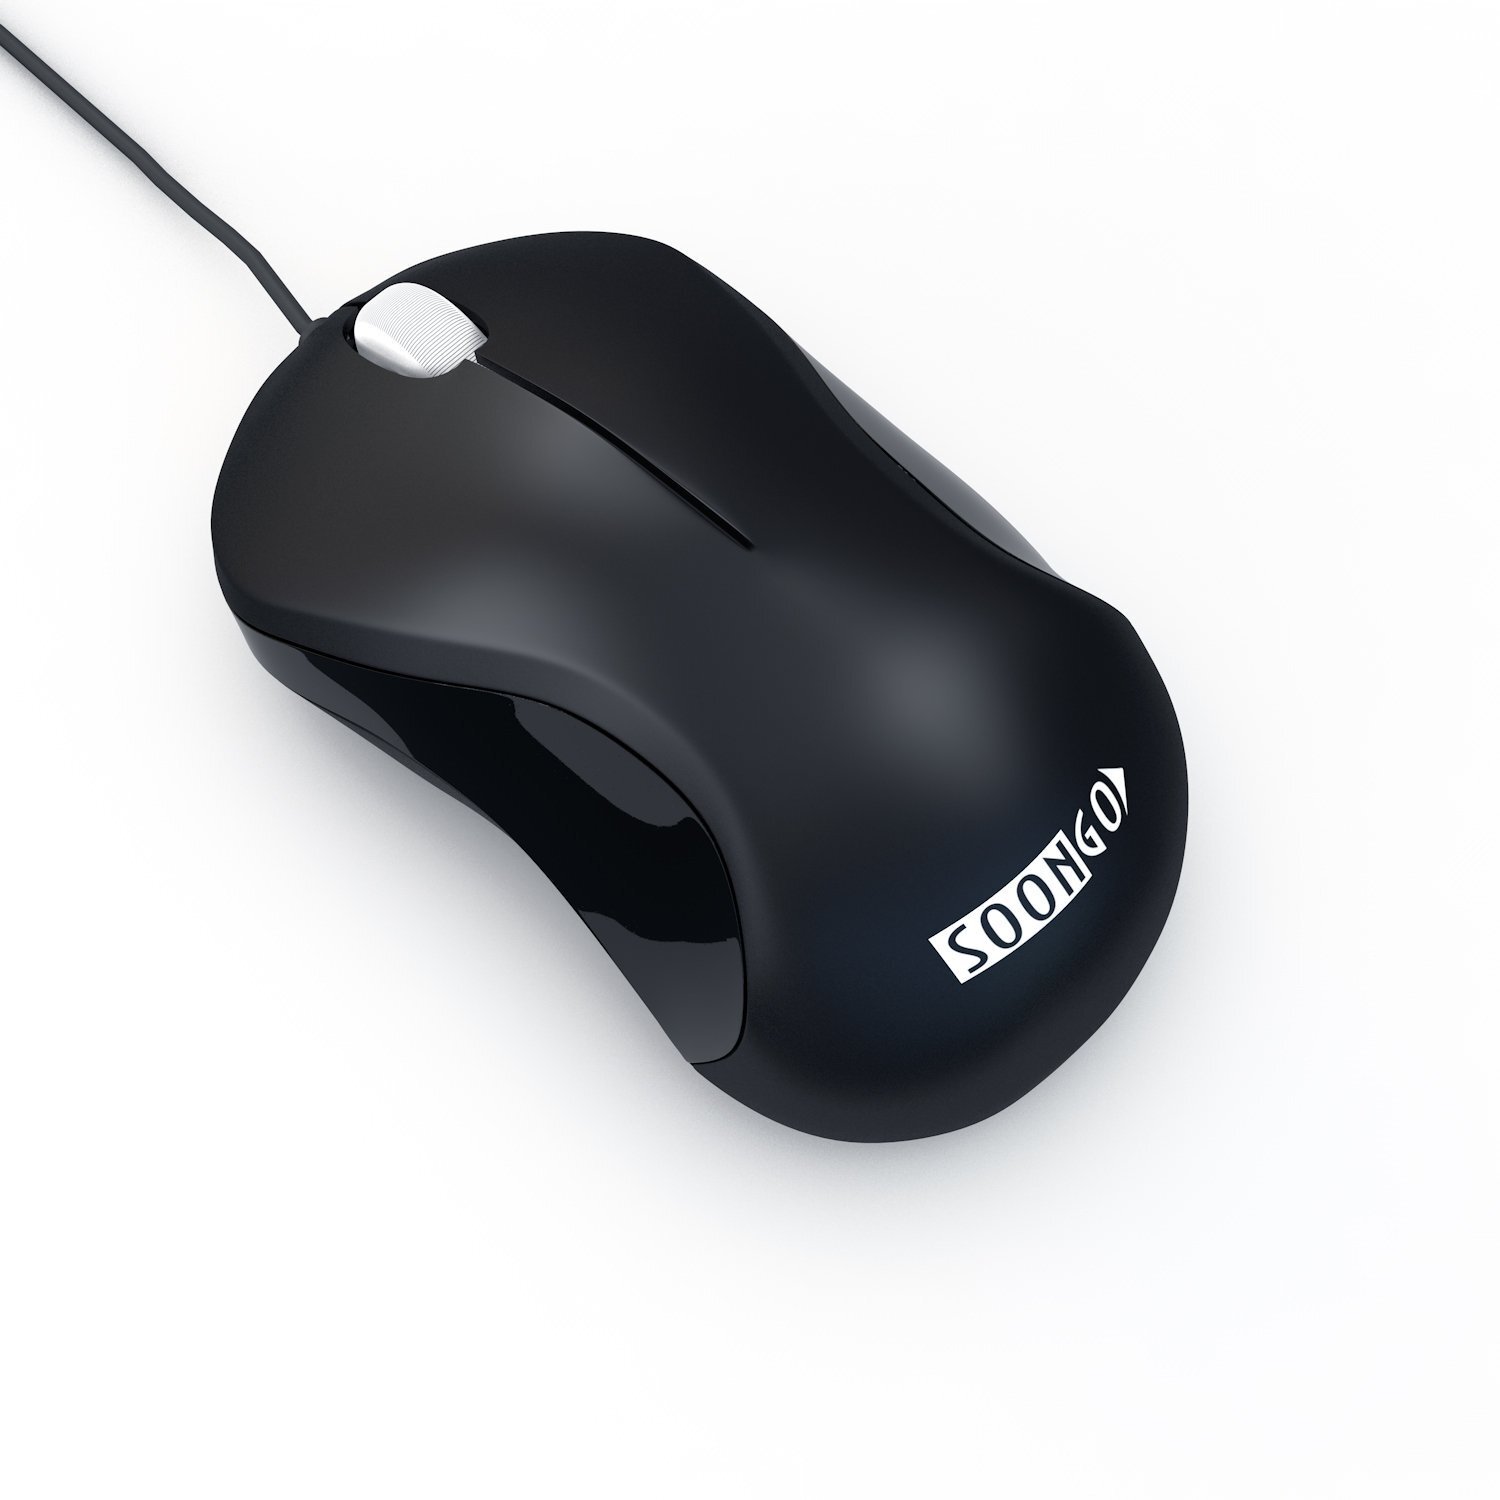 Wireless mouse for macbook air